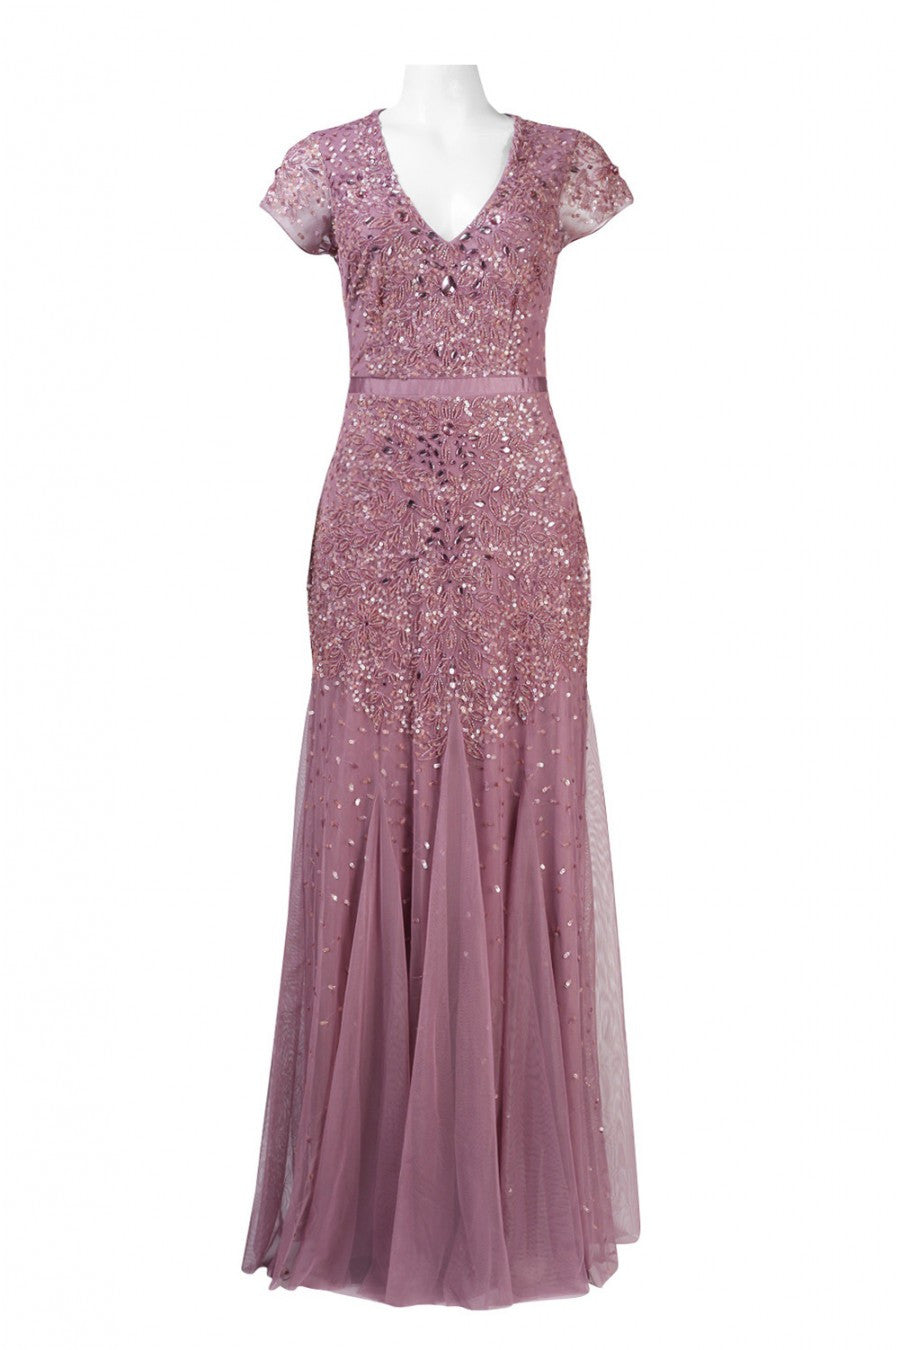 dusty rose gown with sleeves